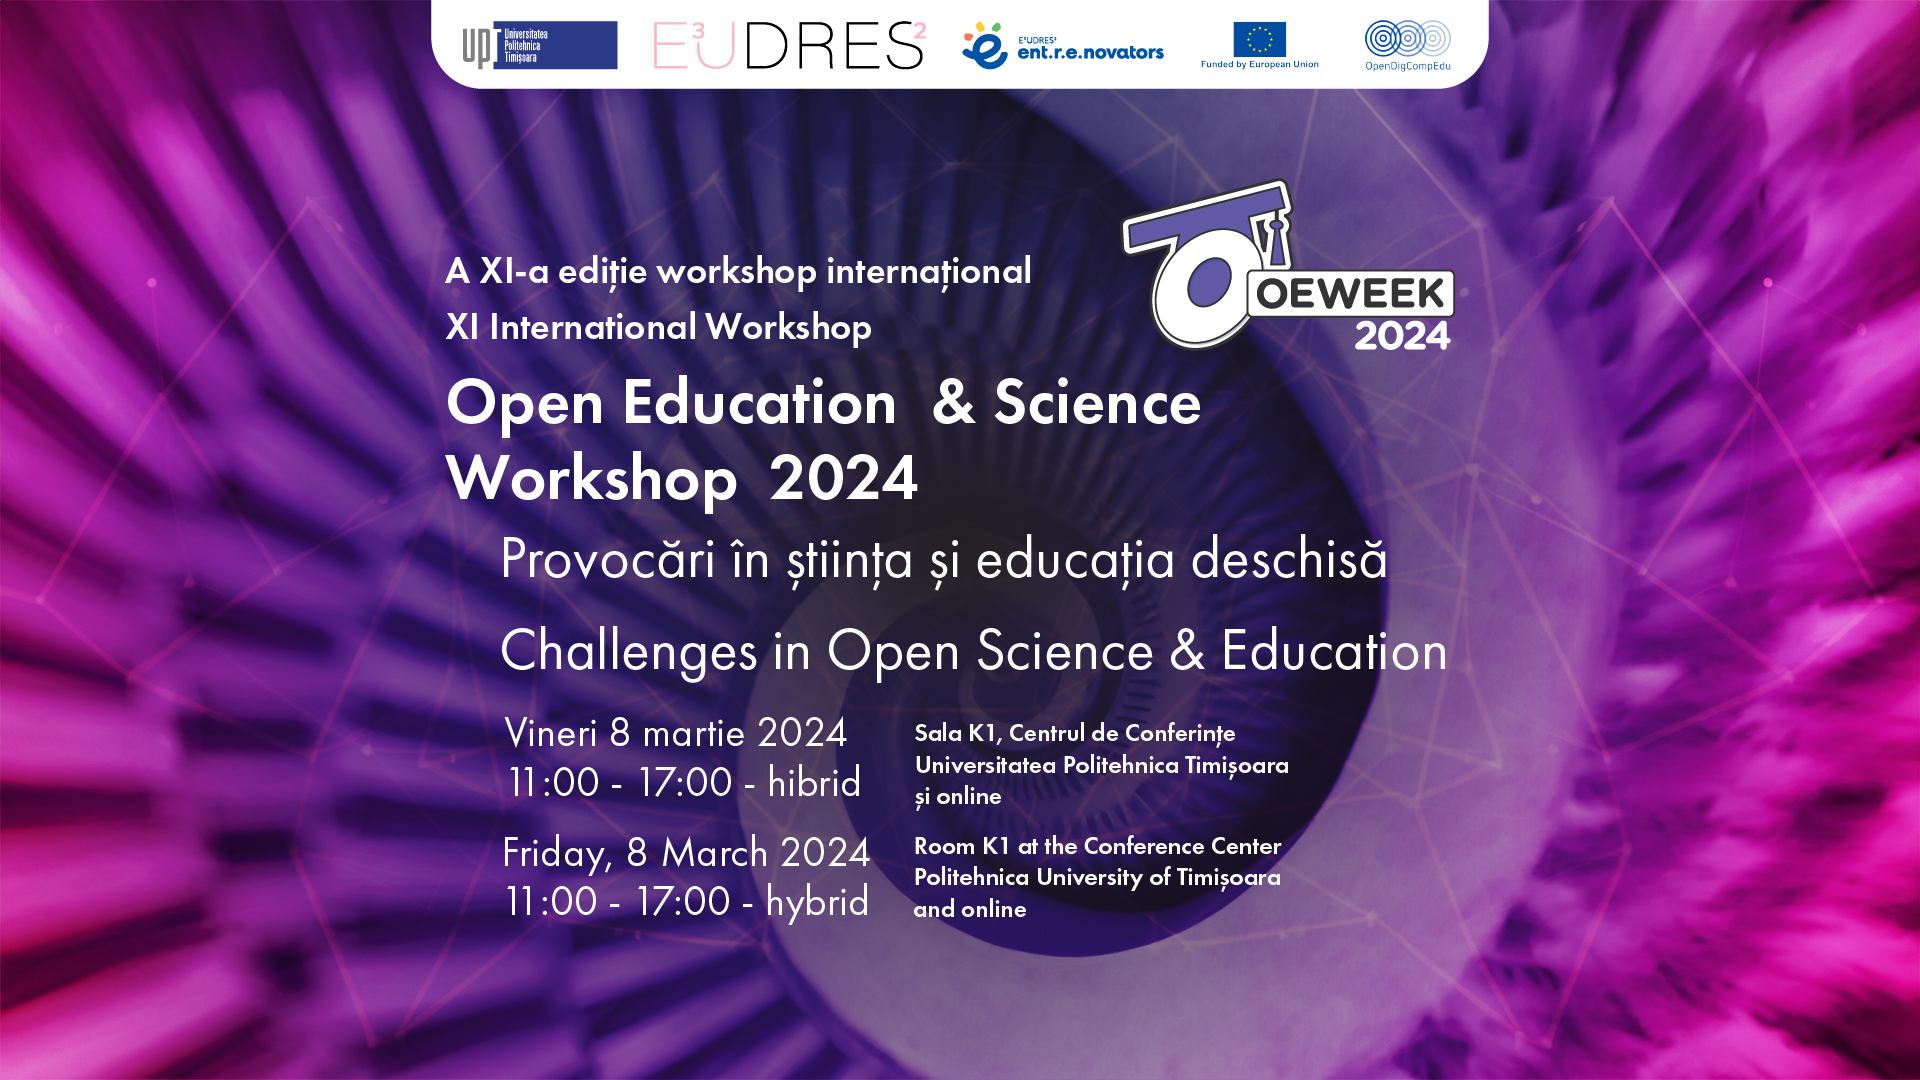 The XI edition of the International Workshop Open Education Week 2024